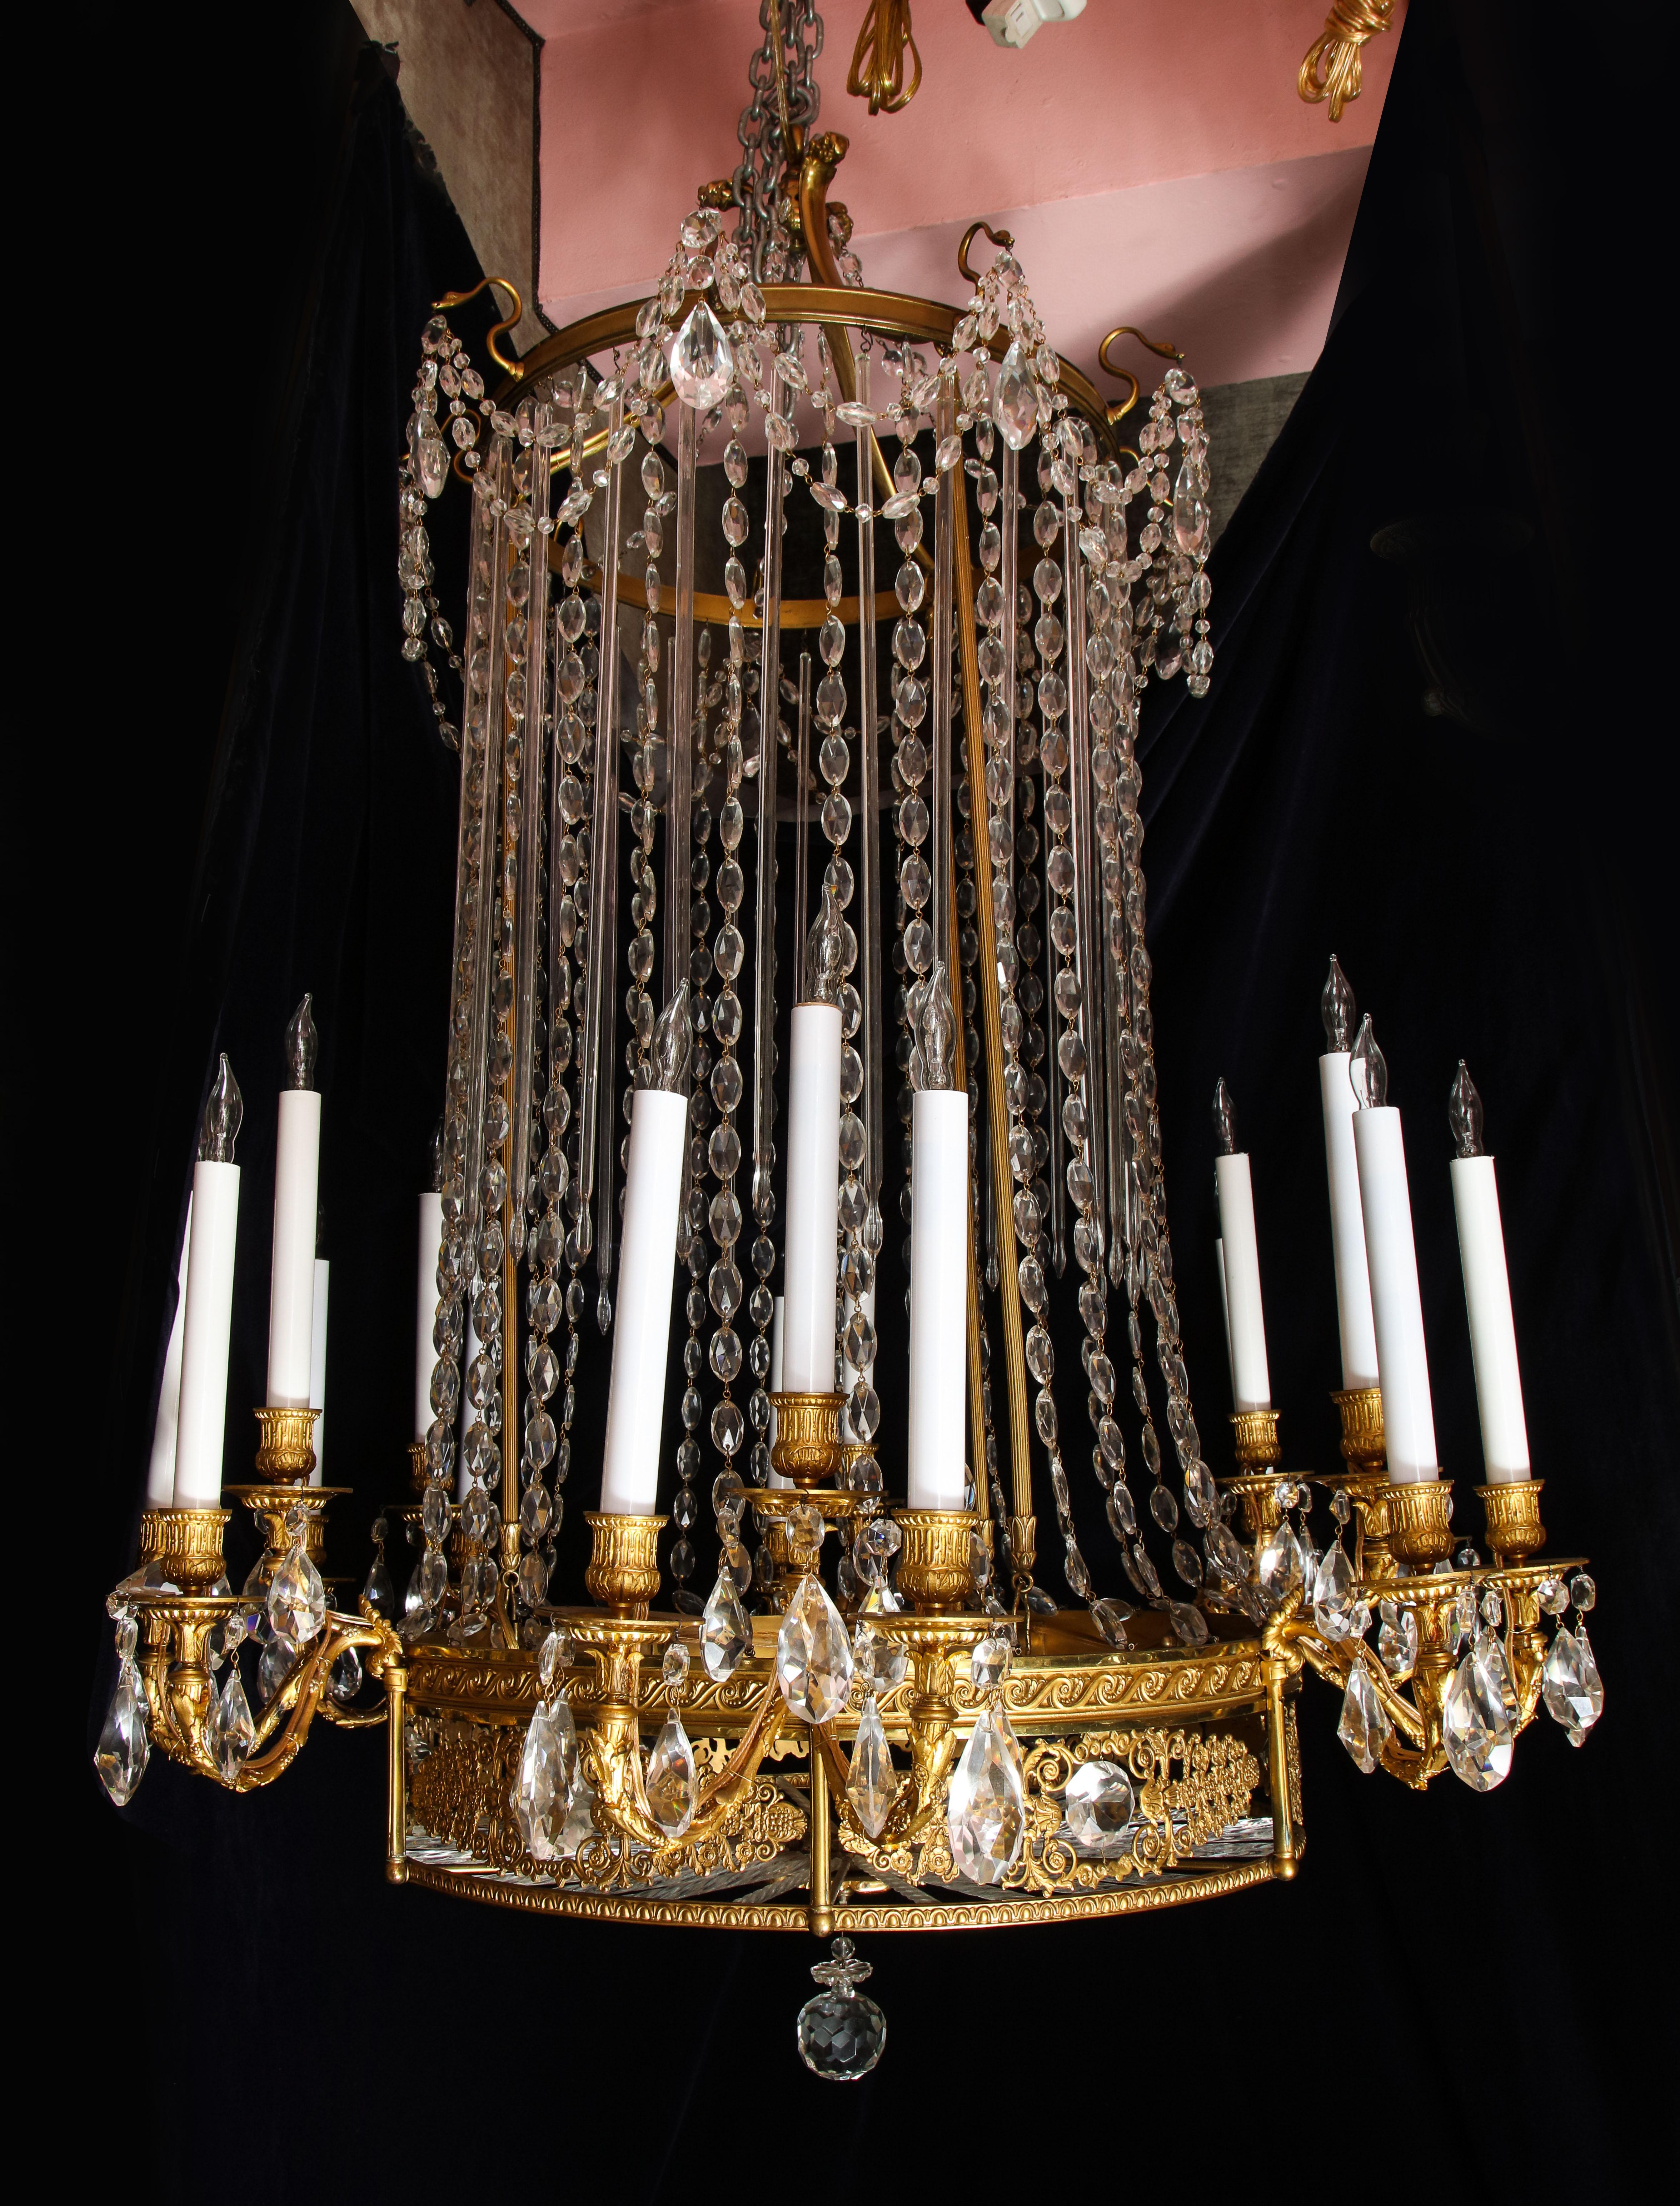 A superb and large antique French Louis XVI Style gilt bronze, cut crystal and glass 18 arm chandelier of exquisite detail embellished with fine cut crystal prisms, chains and glass rods.